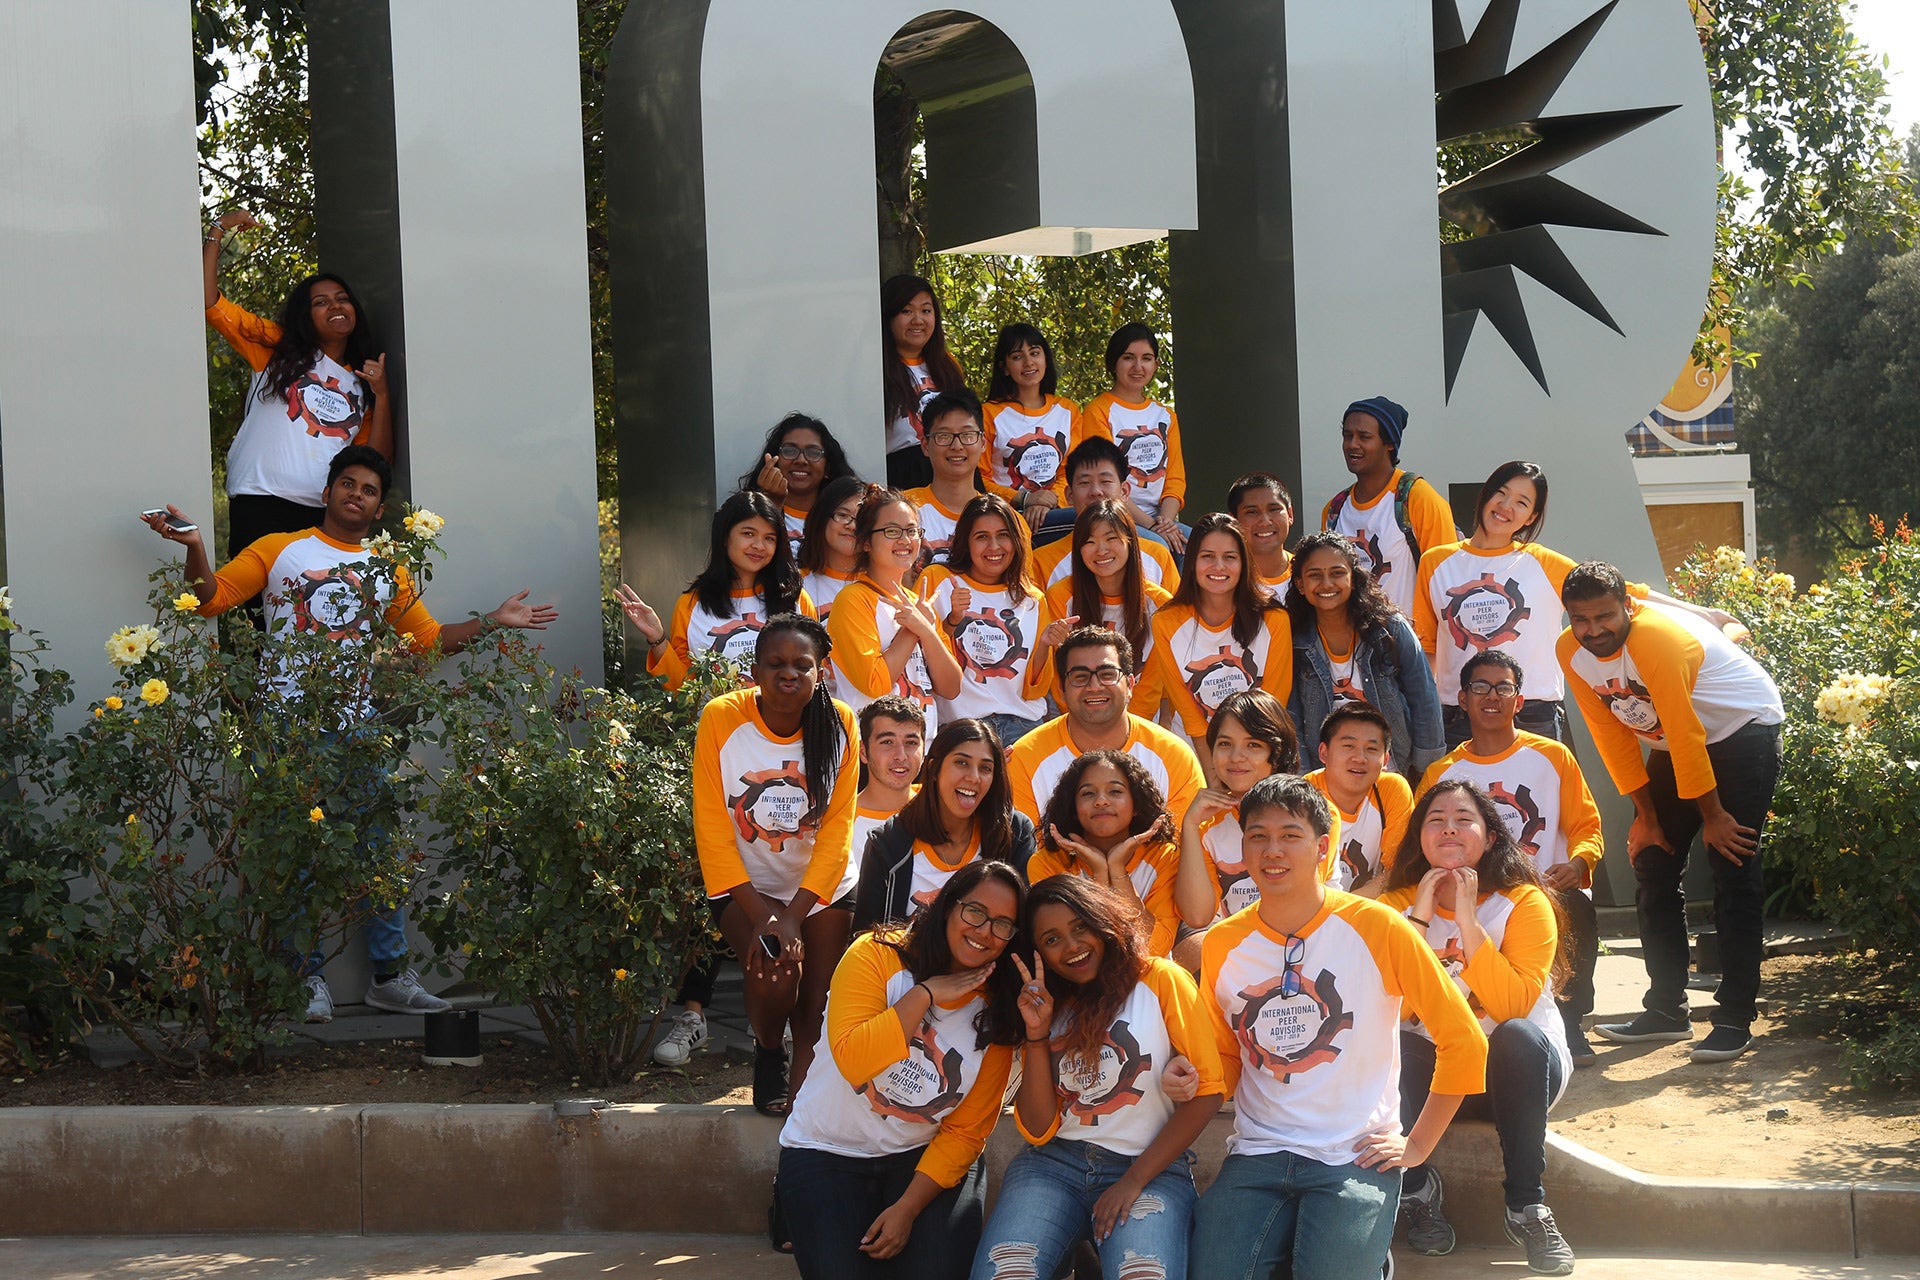 Group of UCR students posing in front of UCR letters